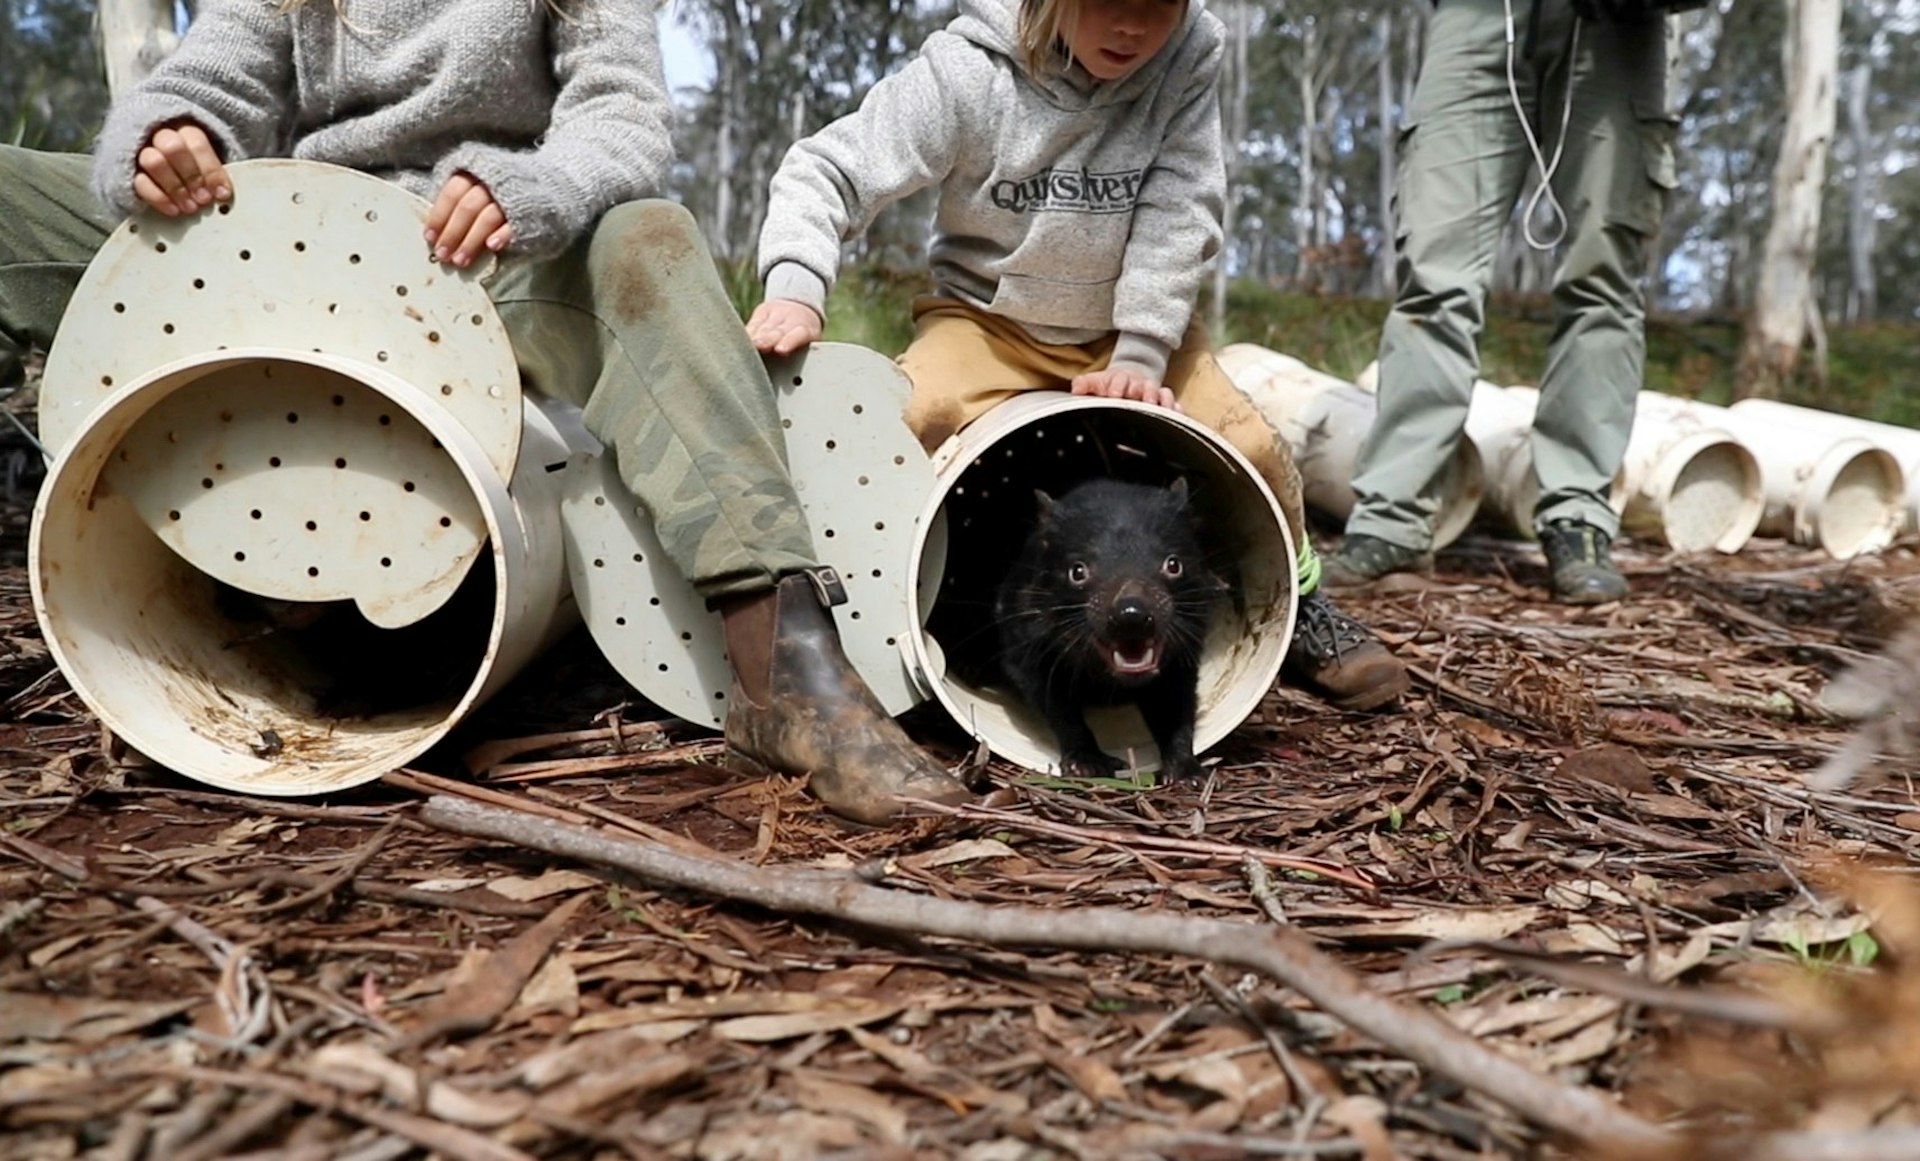 Tasmanian Devils being released into the wild from safety tubes